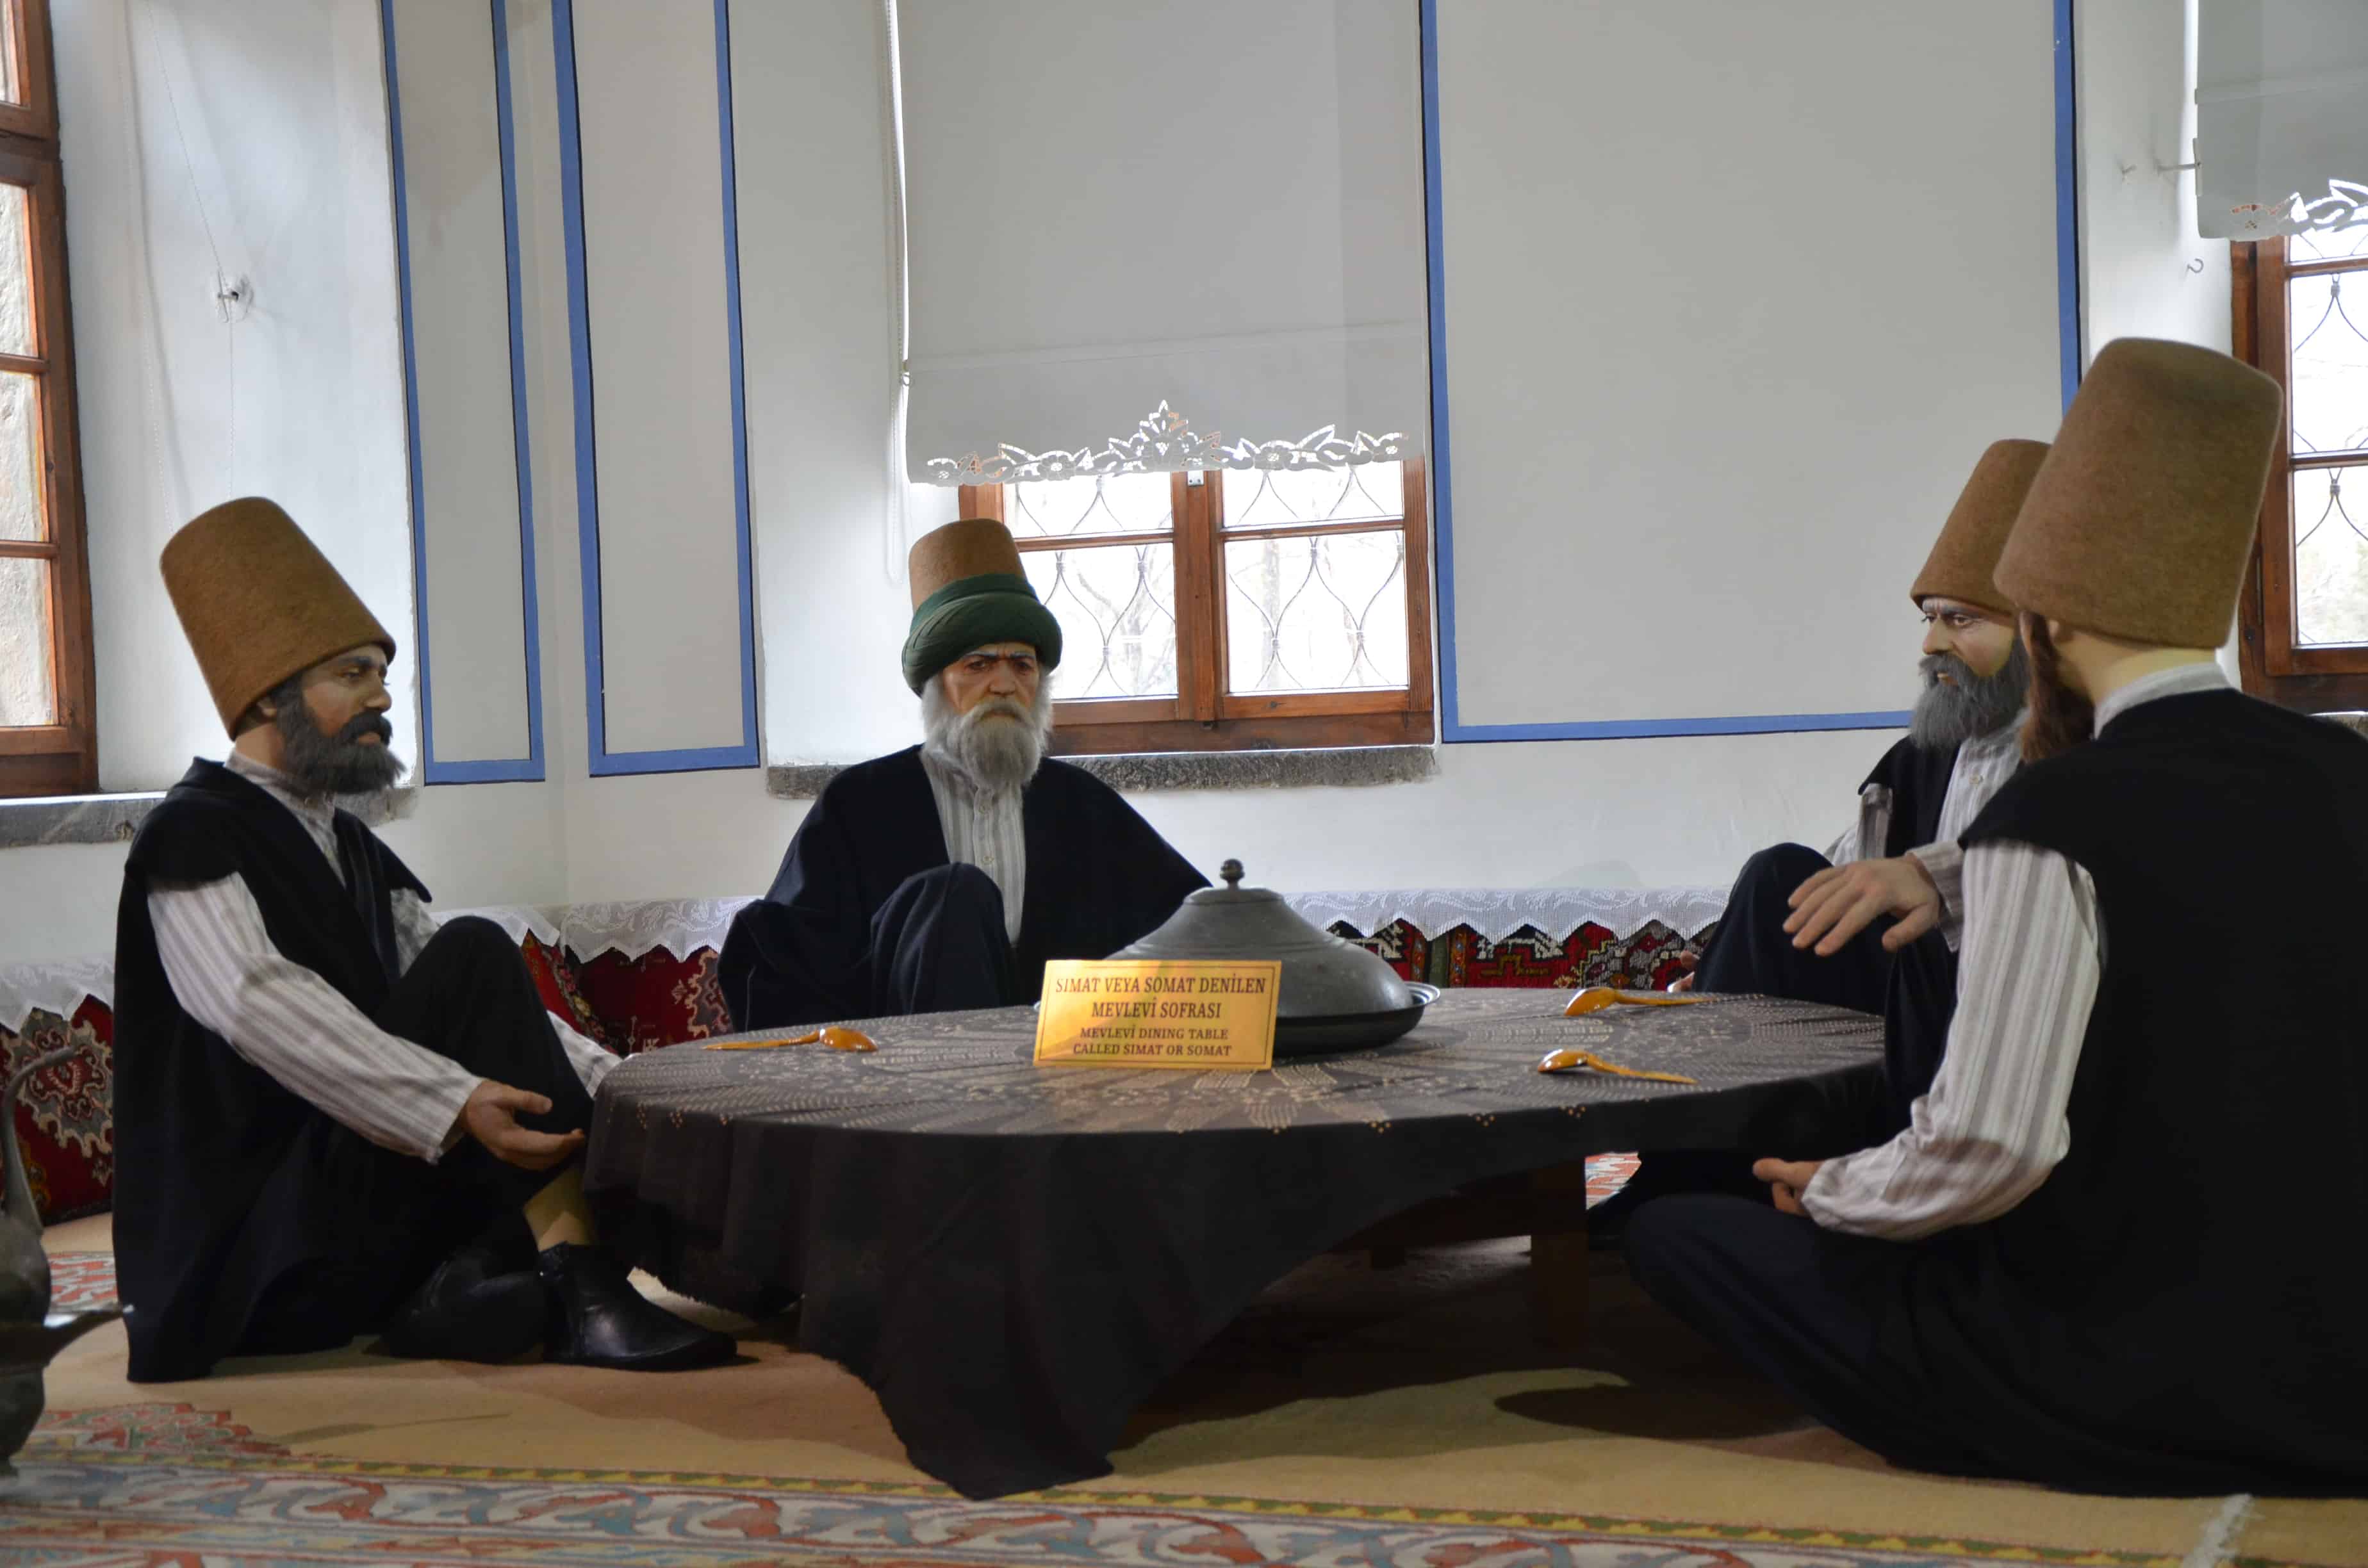 Dervishes sitting around a table in the kitchen at the Mevlana Museum in Konya, Turkey